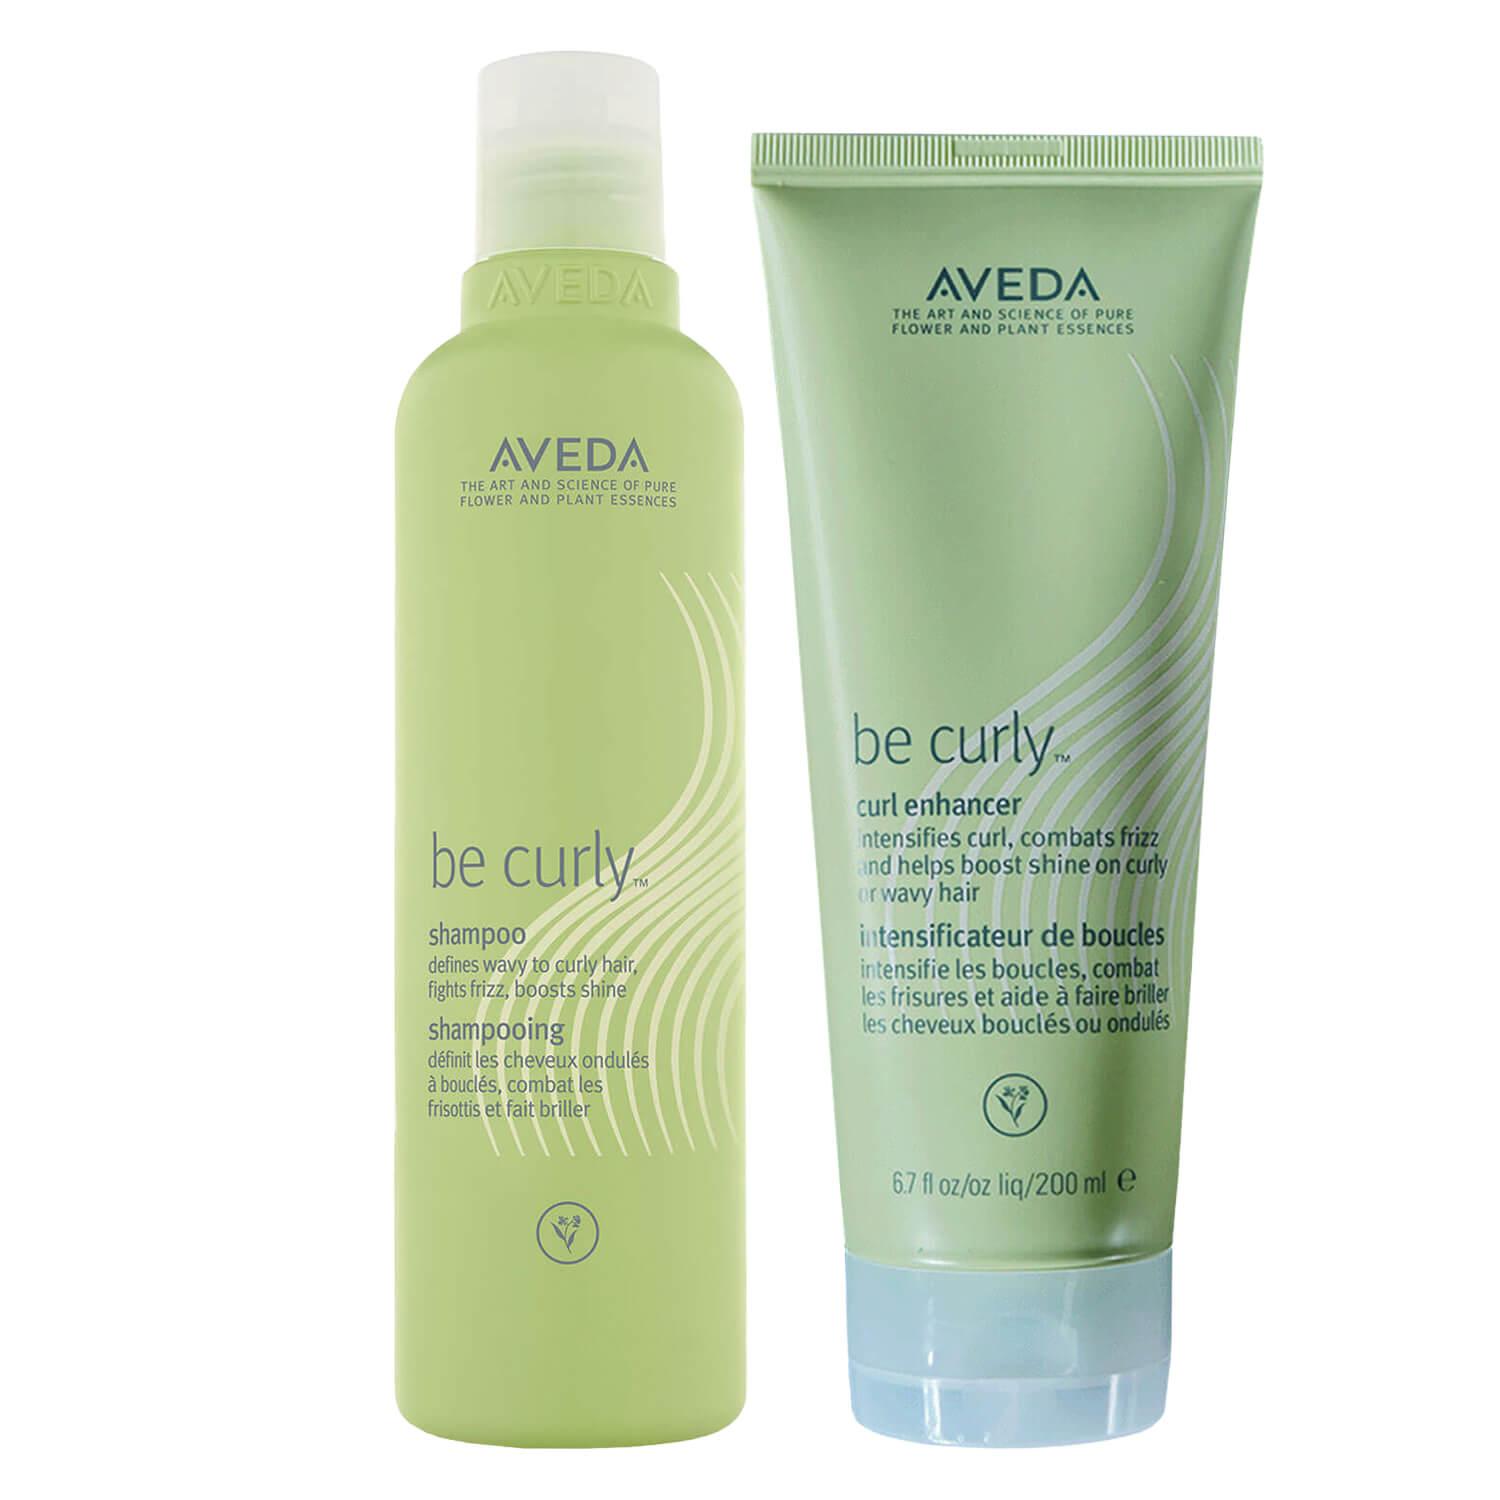 be curly calm duo set